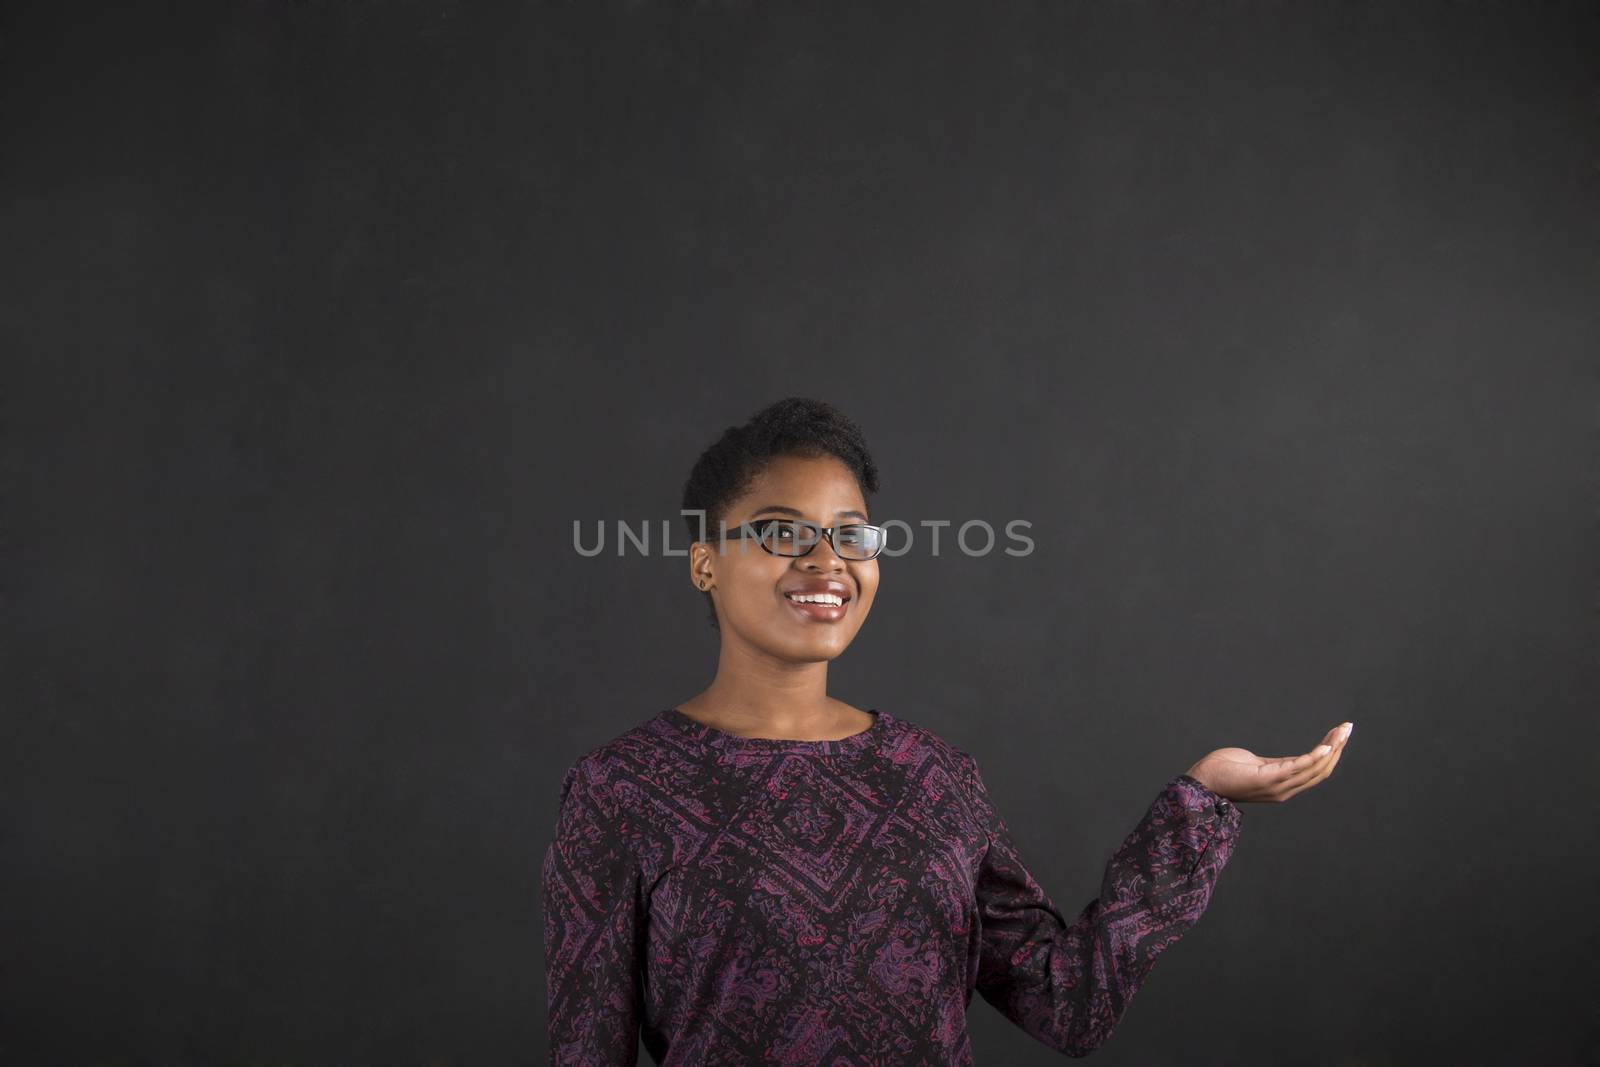 South African or African American black woman teacher or student holding her hand out to the side standing against a chalk blackboard background inside